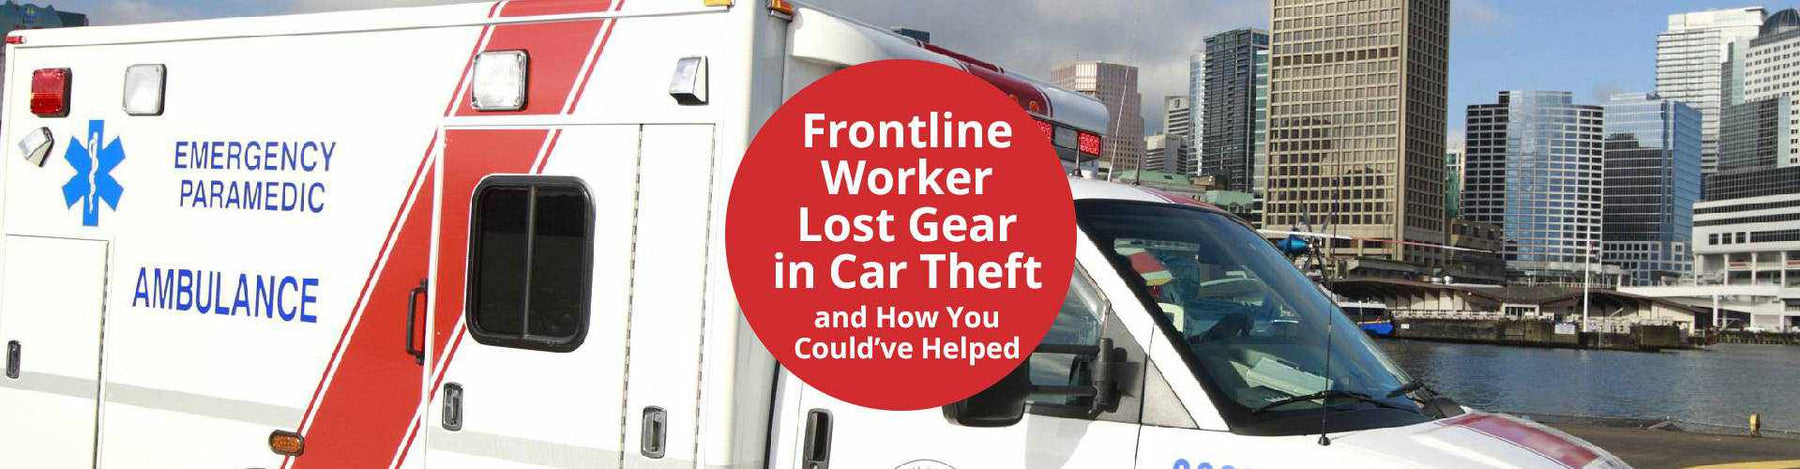 Frontline Worker Lost Gear in Car Theft and How You Could’ve Helped - - BlackboxMyCar